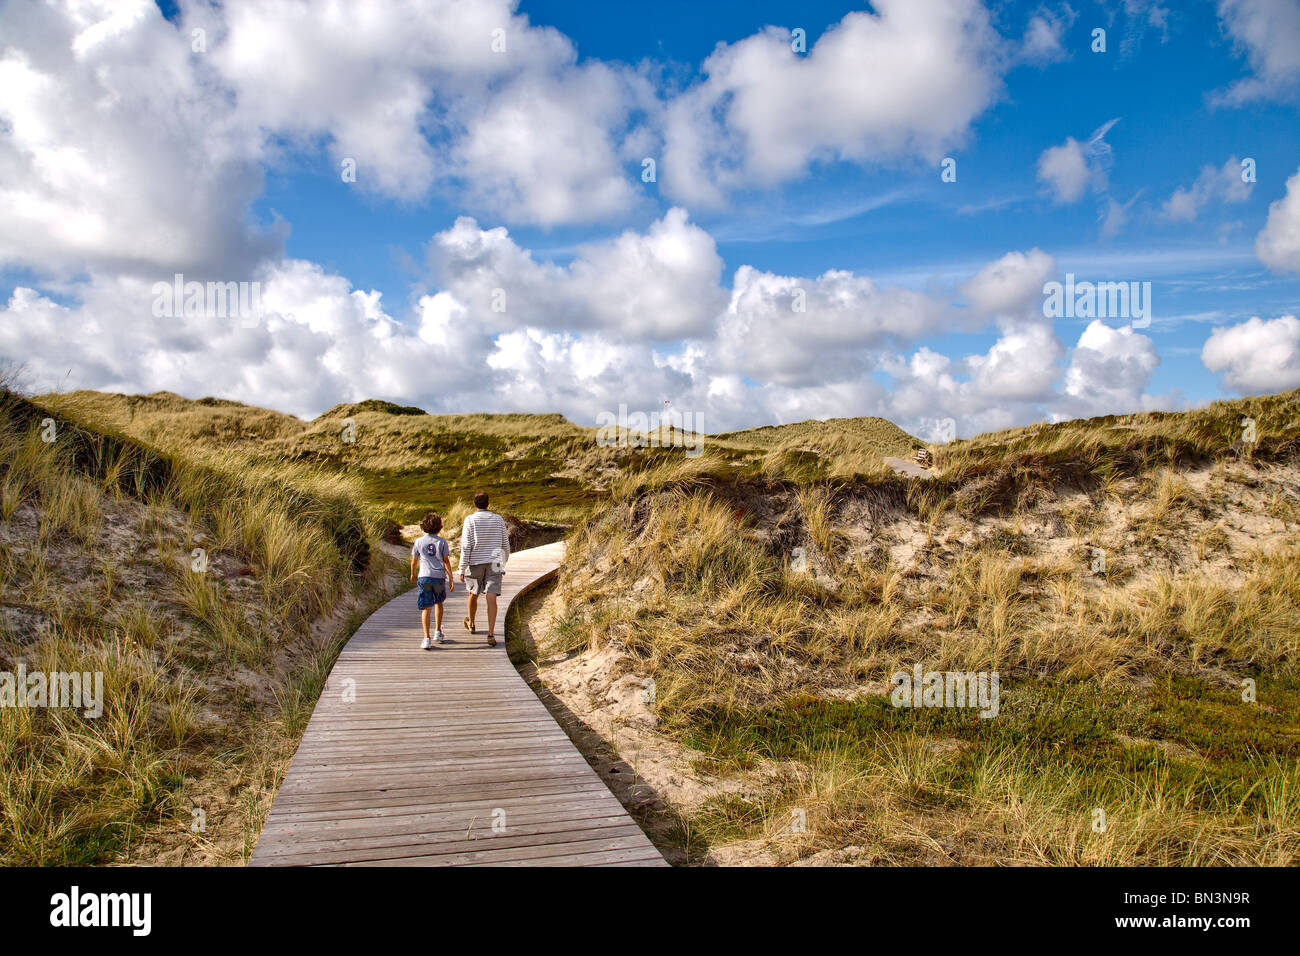 Man and boy hiking on a boardwalk in the dunes, Kampen, Sylt, Germany Stock Photo